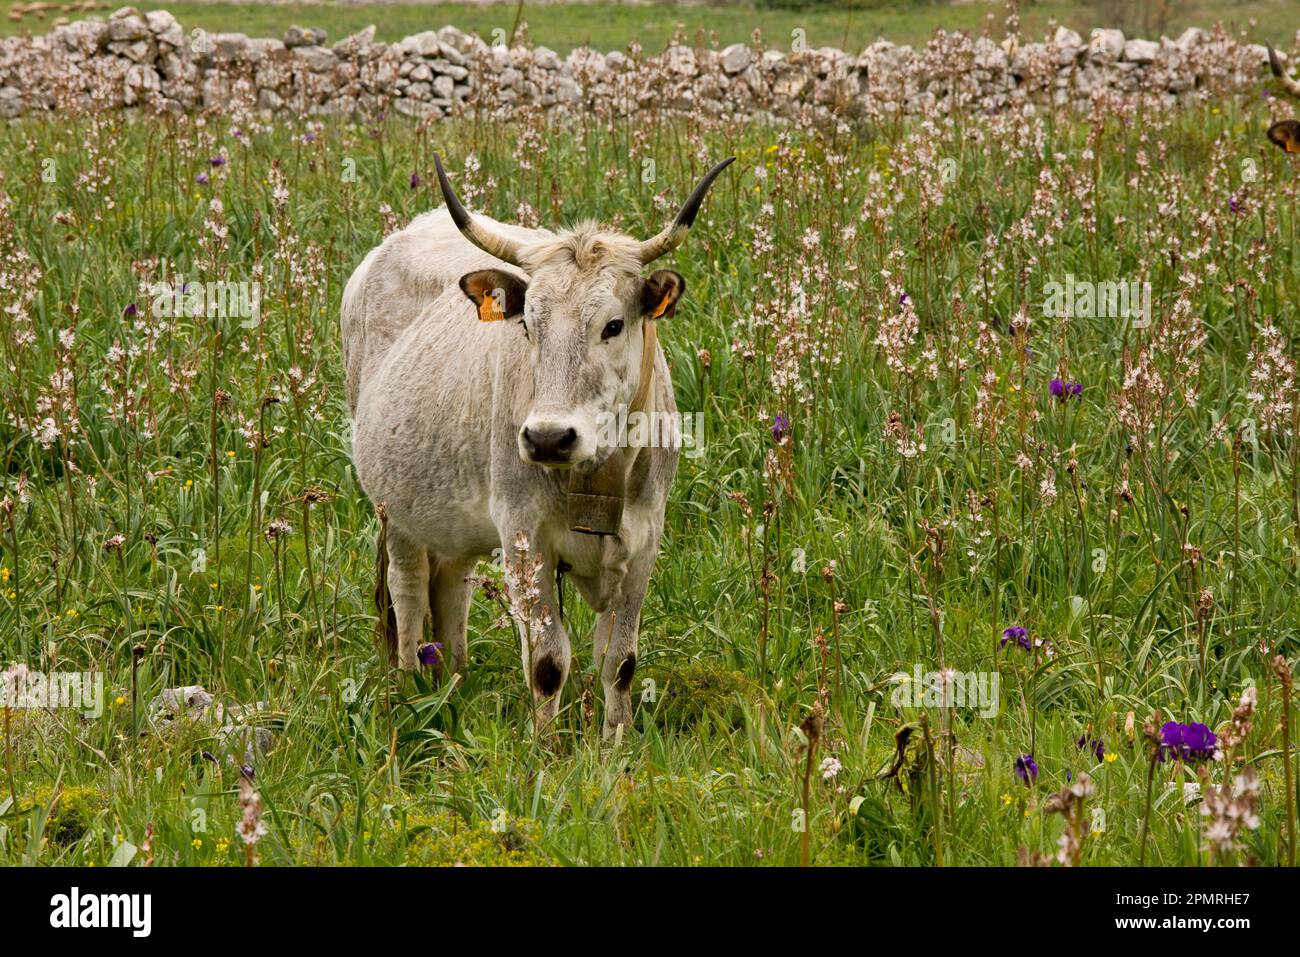 Domestic cattle, Podolica cattle, with bell, grazing on walled pasture, Gargano peninsula, Apulia, Italy Stock Photo